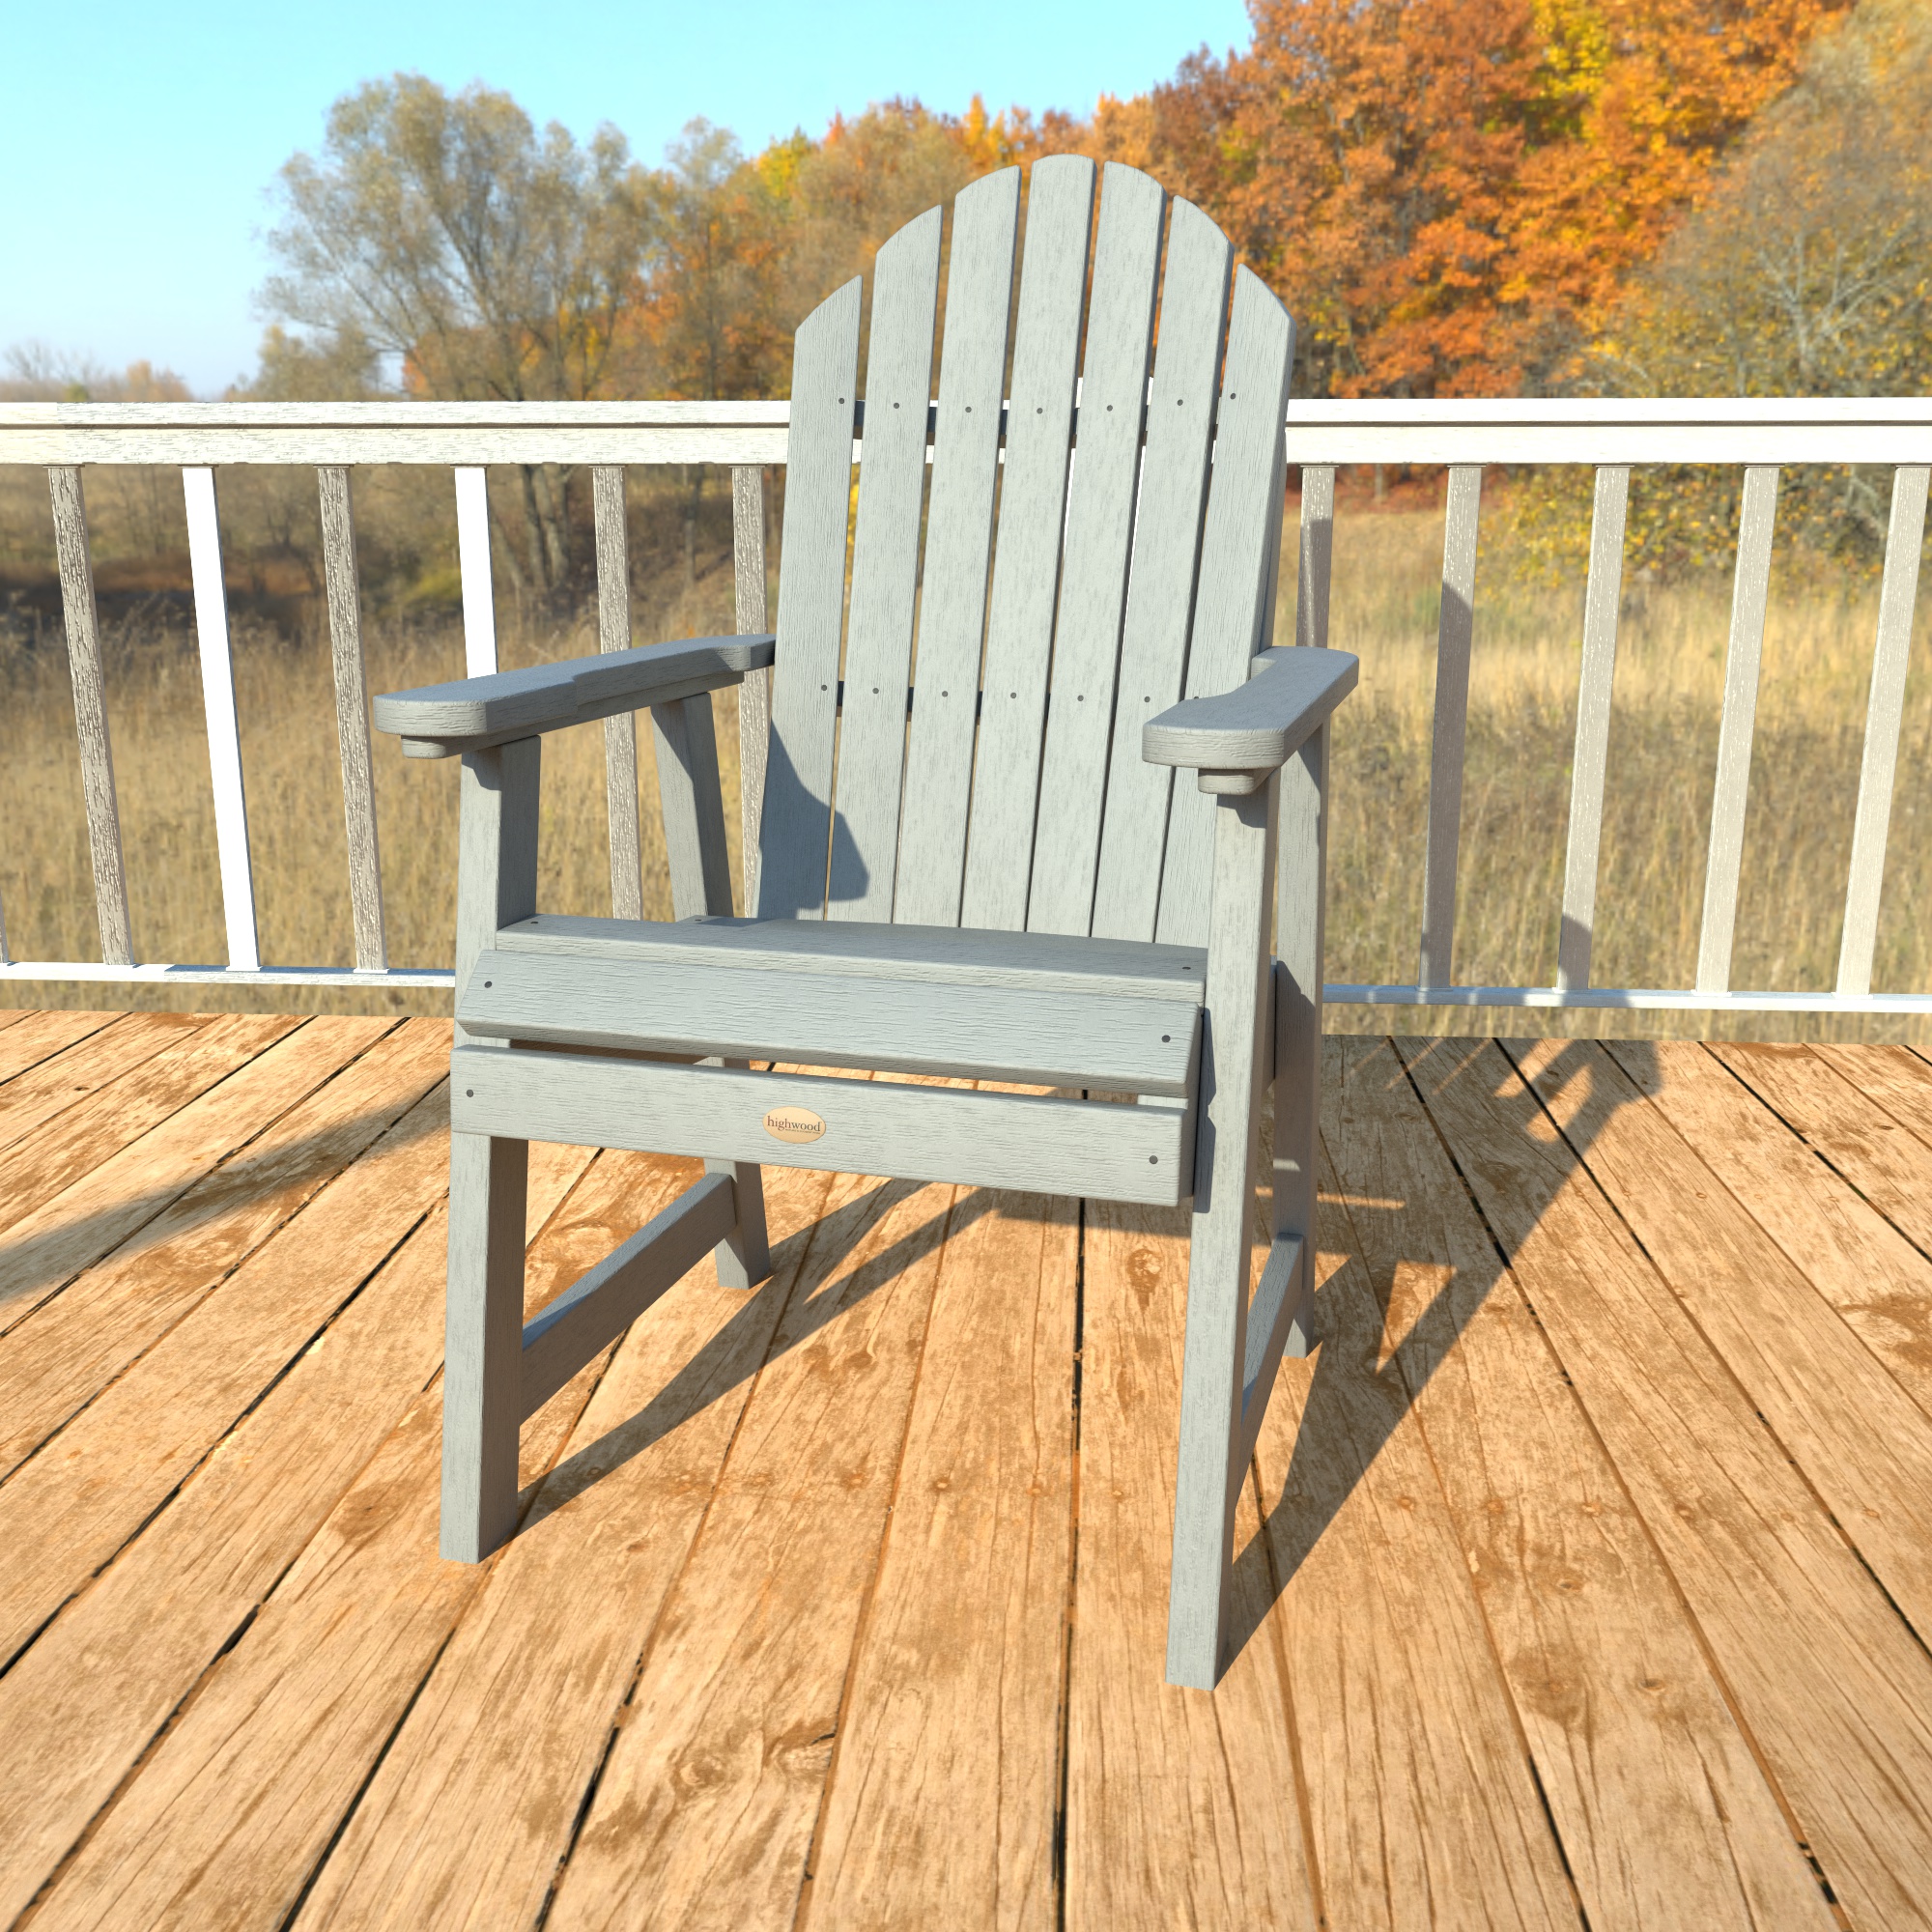 Highwood Hamilton Deck Chair - Dining Height - image 2 of 2